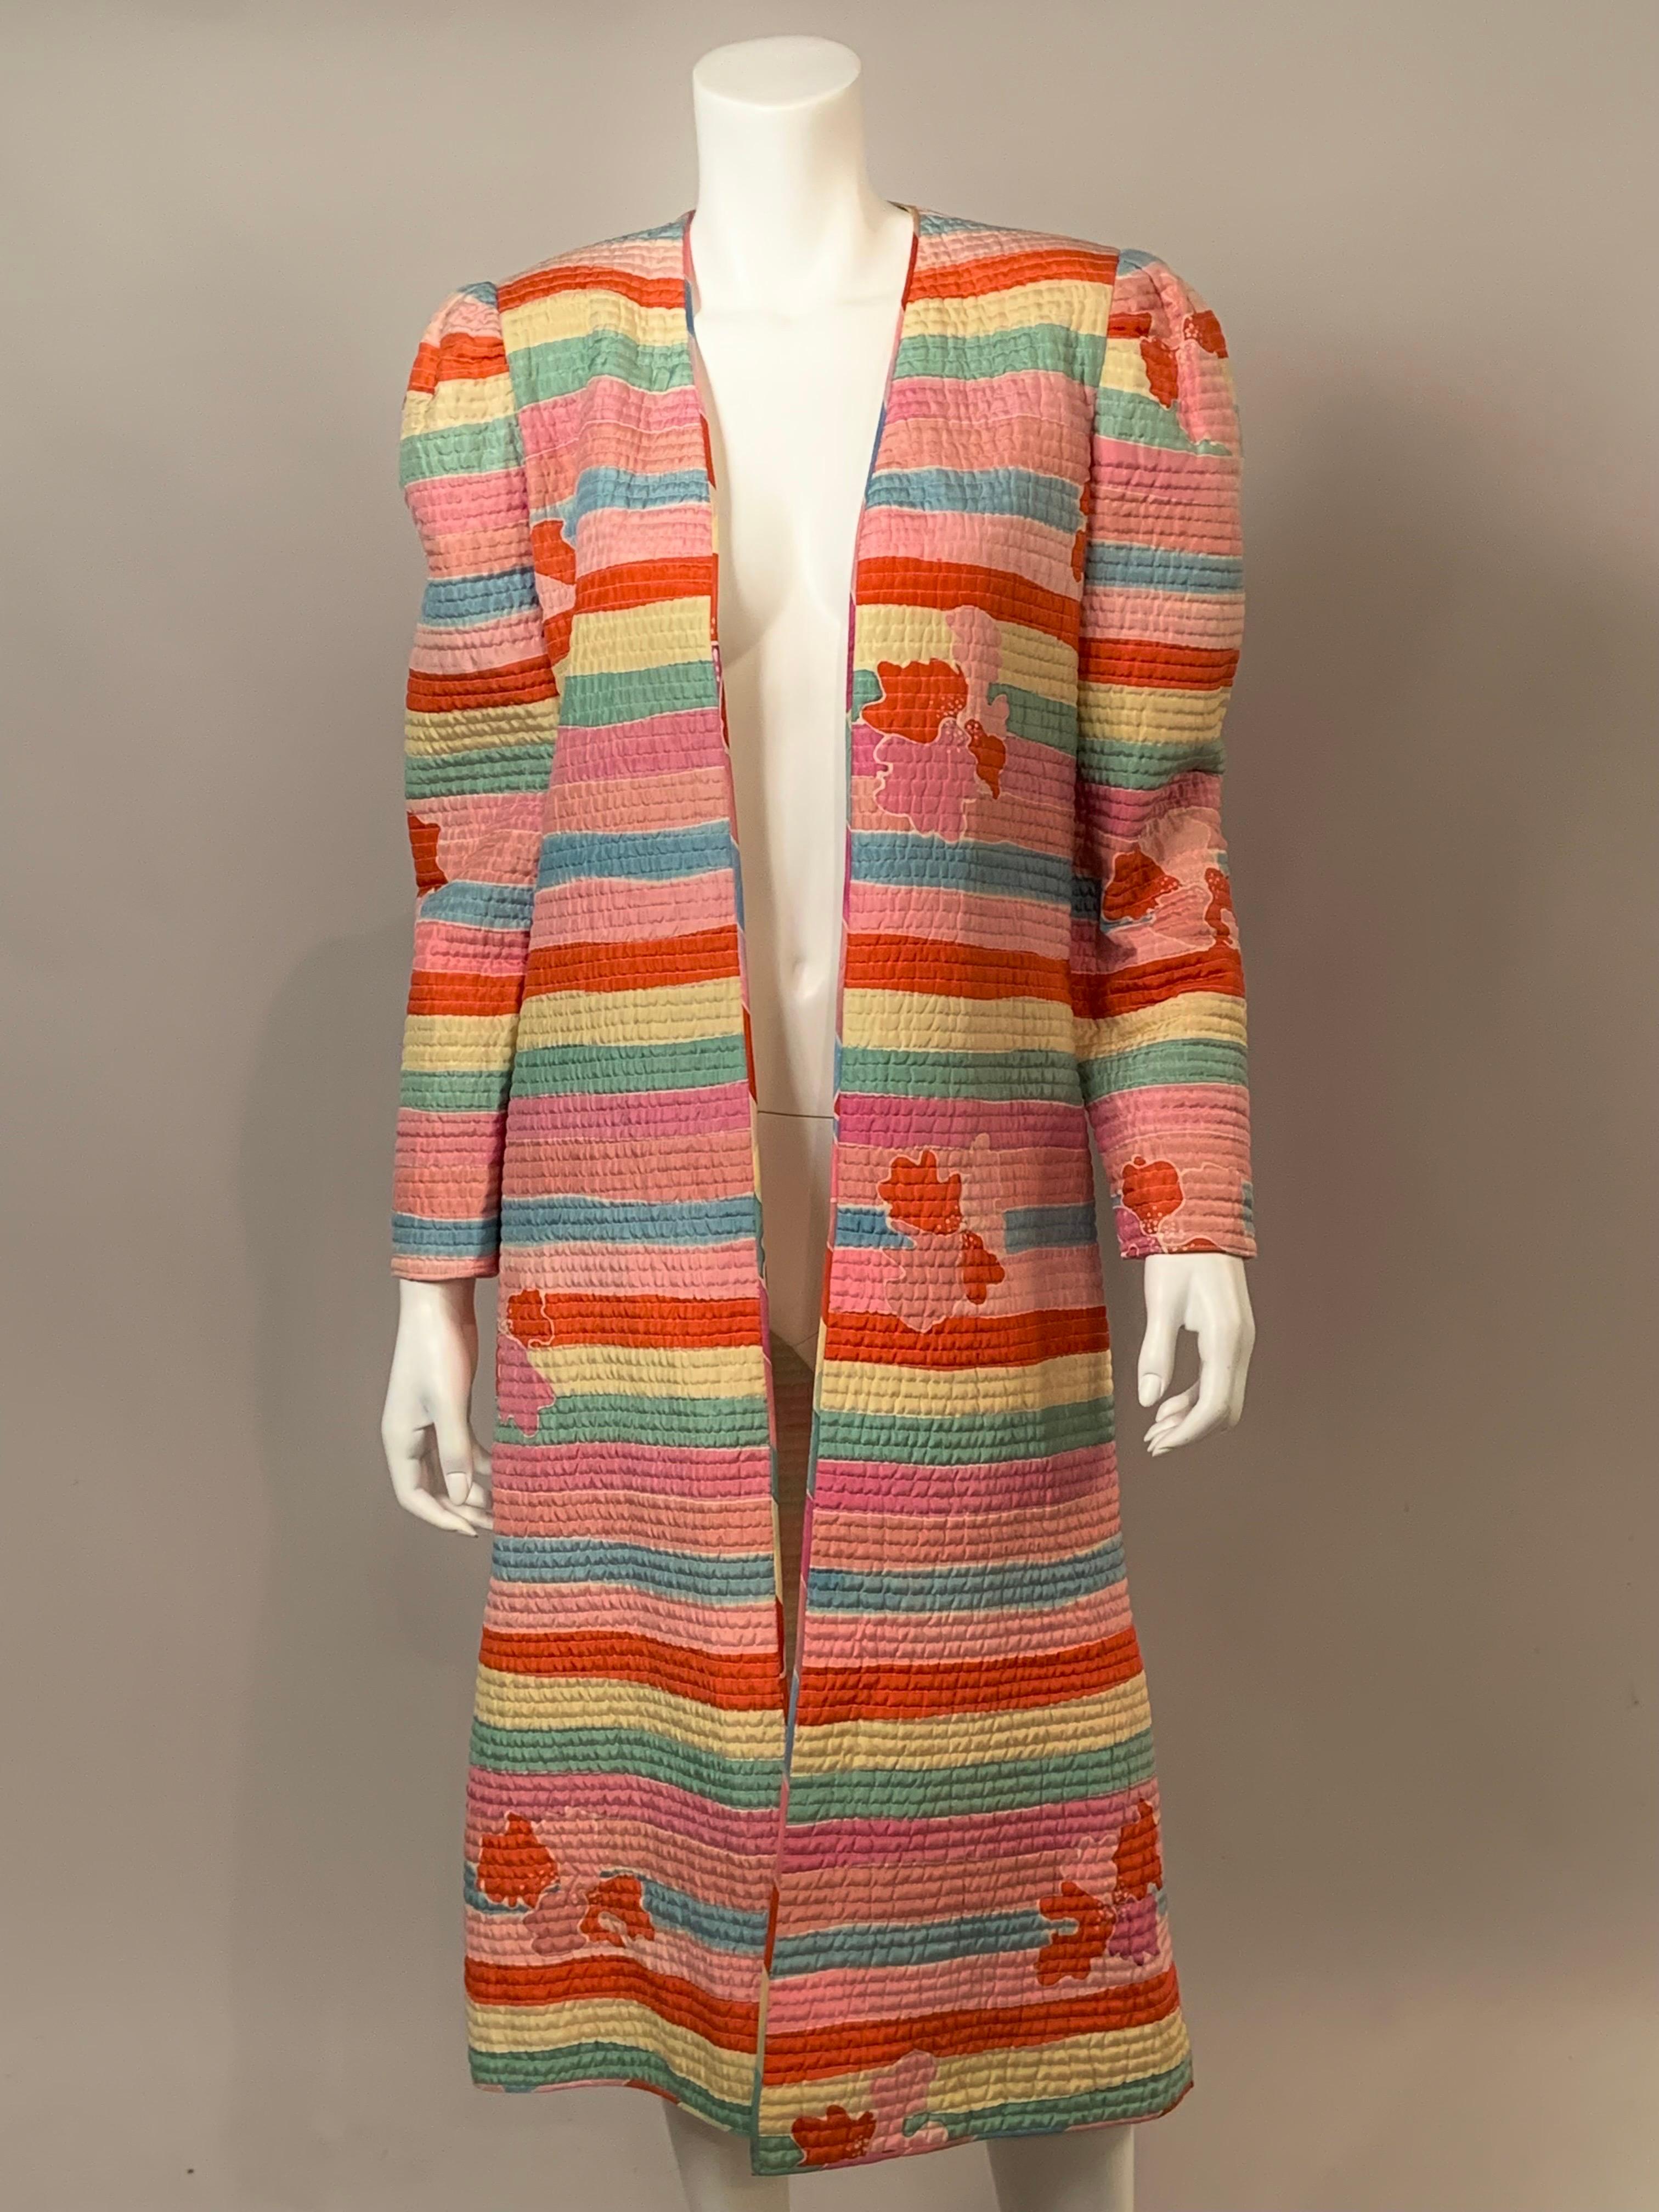 This is such a cheerful and versatile coat designed by Mary McFadden in the 1980's.  The fabric is a luscious striped silk in shades of pink, yellow rose, green, blue and orange.  Abstract floral bouquets are scattered across the stripes.  It is